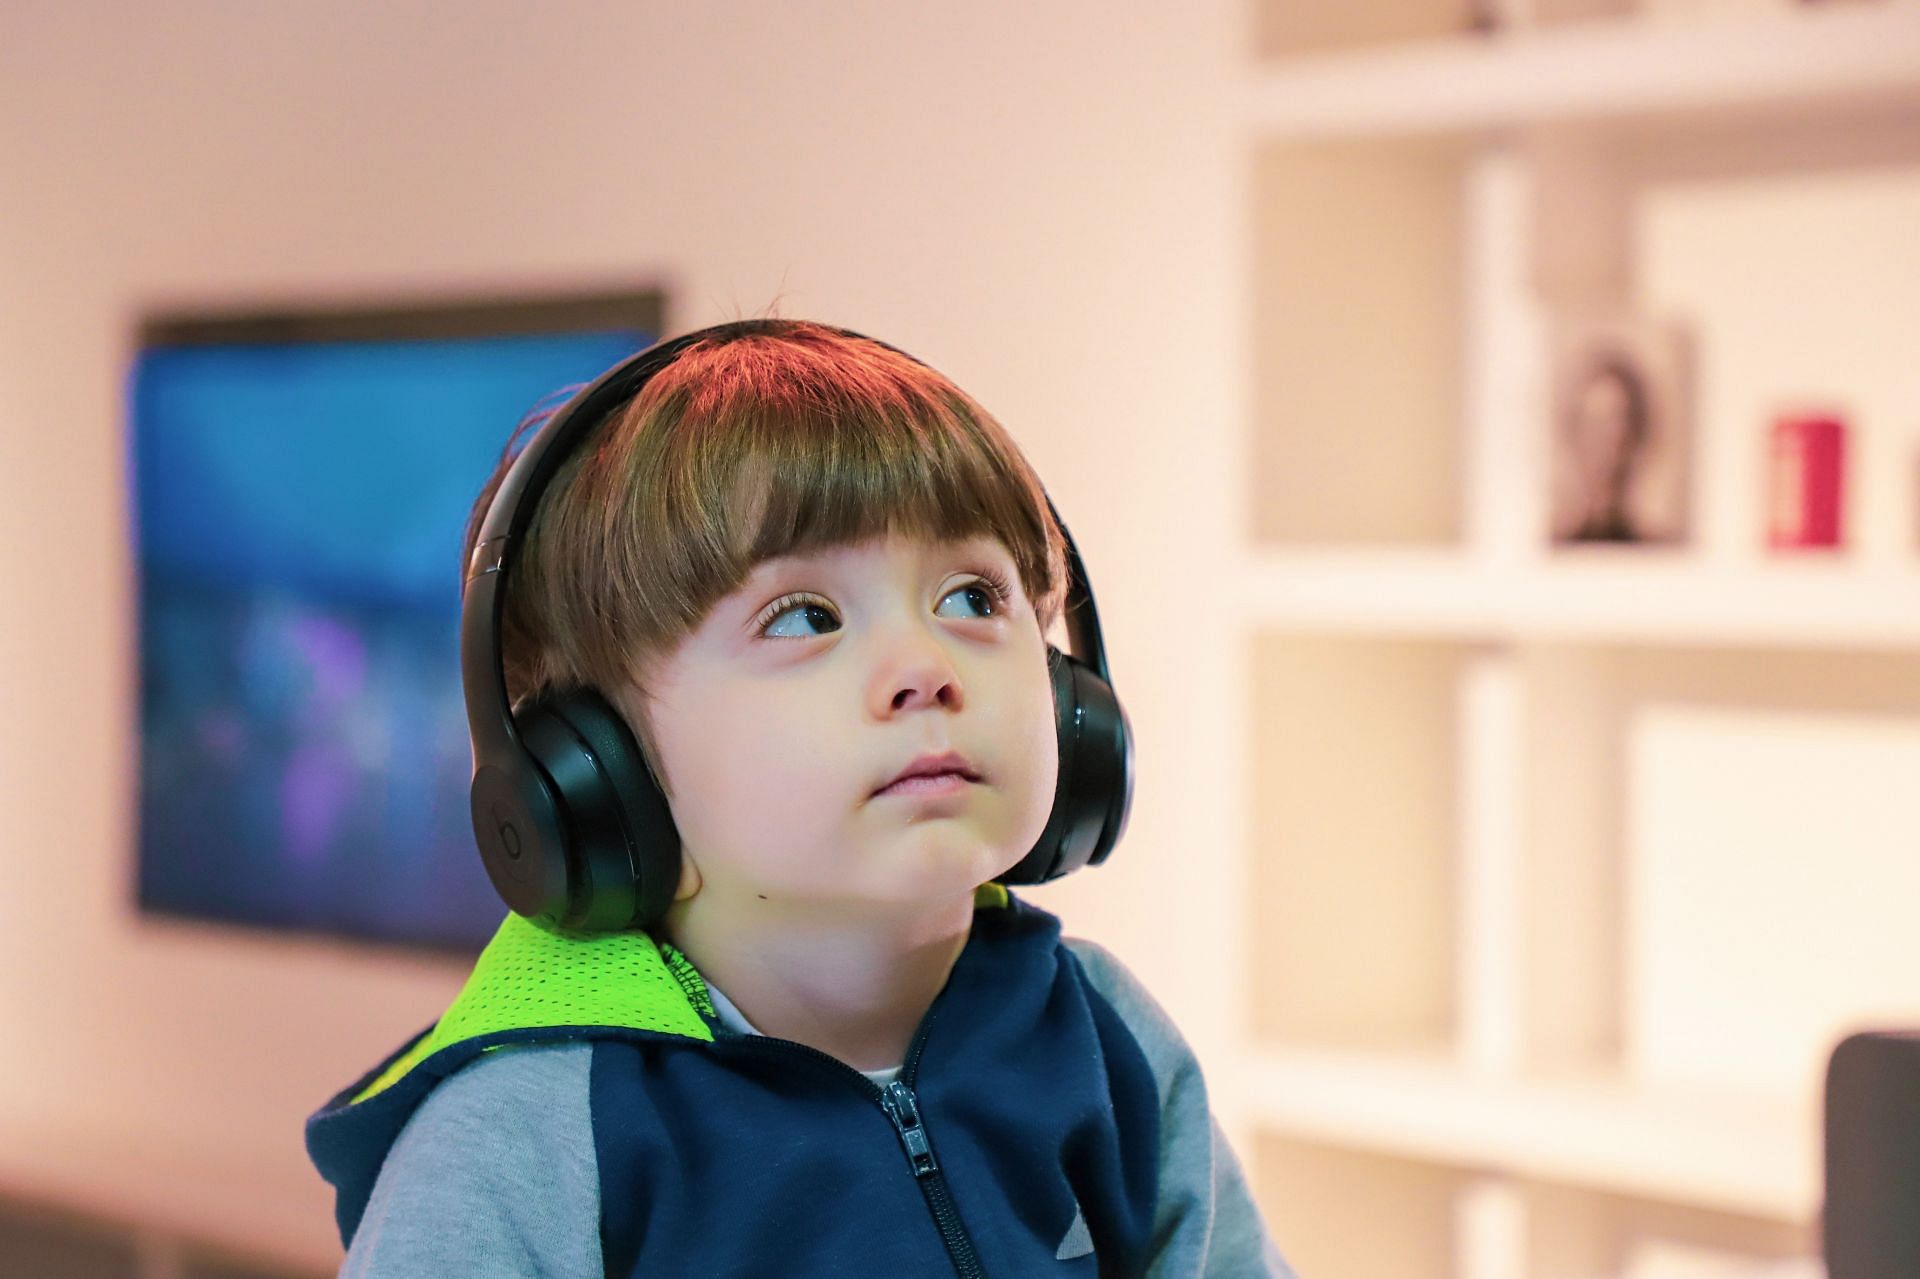 As much as atypical hearing colors sounds, it can occur in children with autism. (Image via Unsplash/ Alrireza Attari)